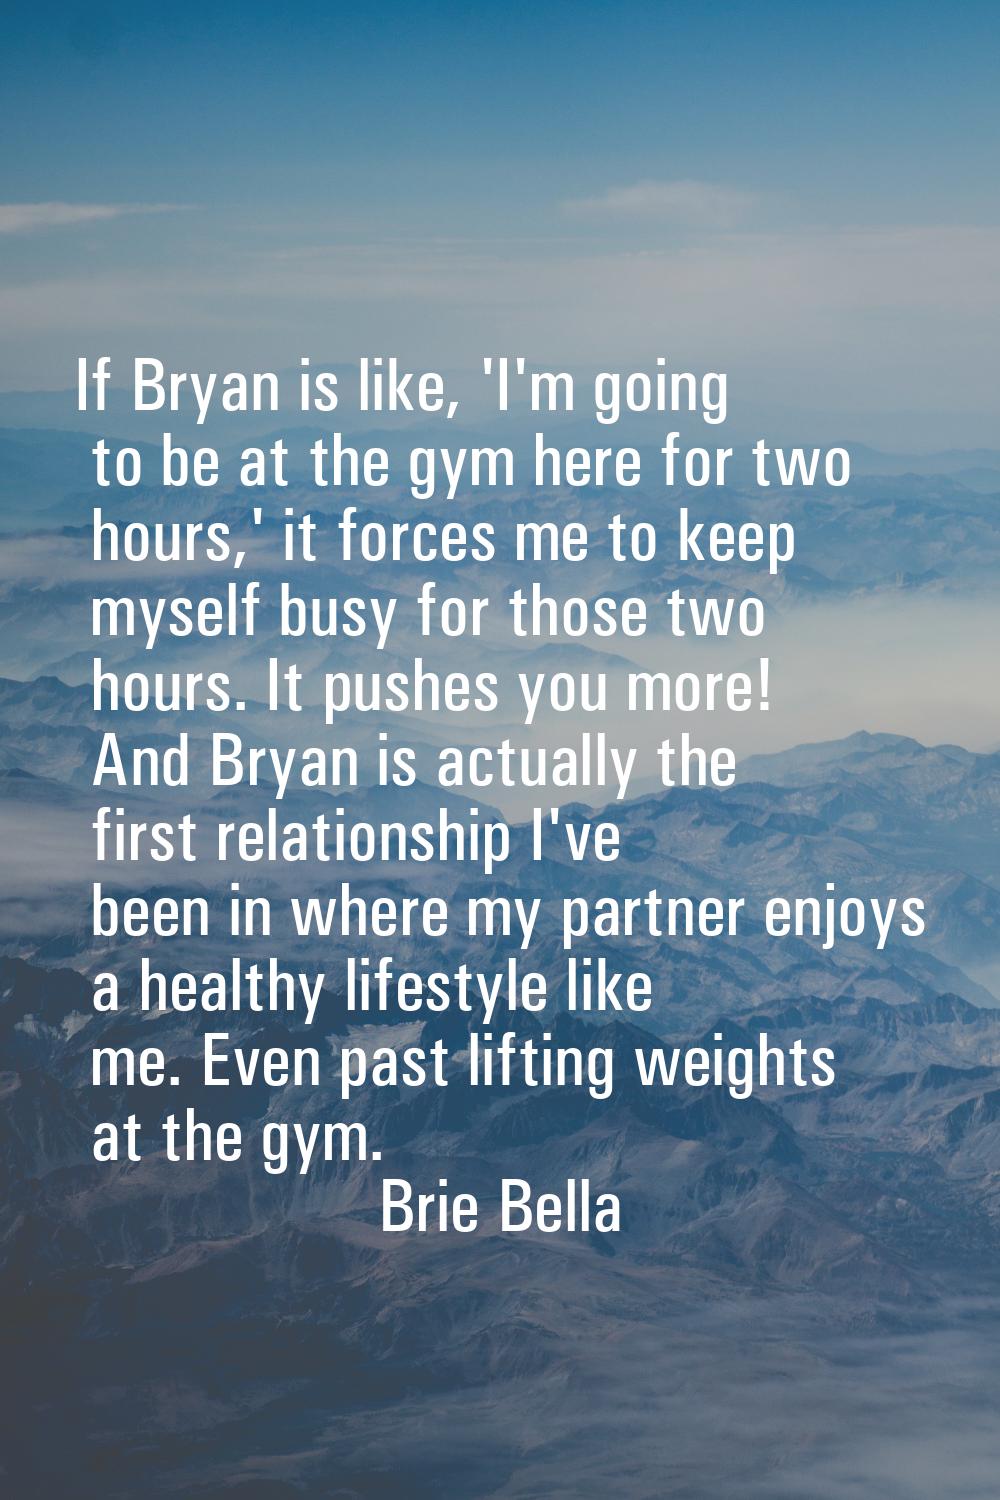 If Bryan is like, 'I'm going to be at the gym here for two hours,' it forces me to keep myself busy